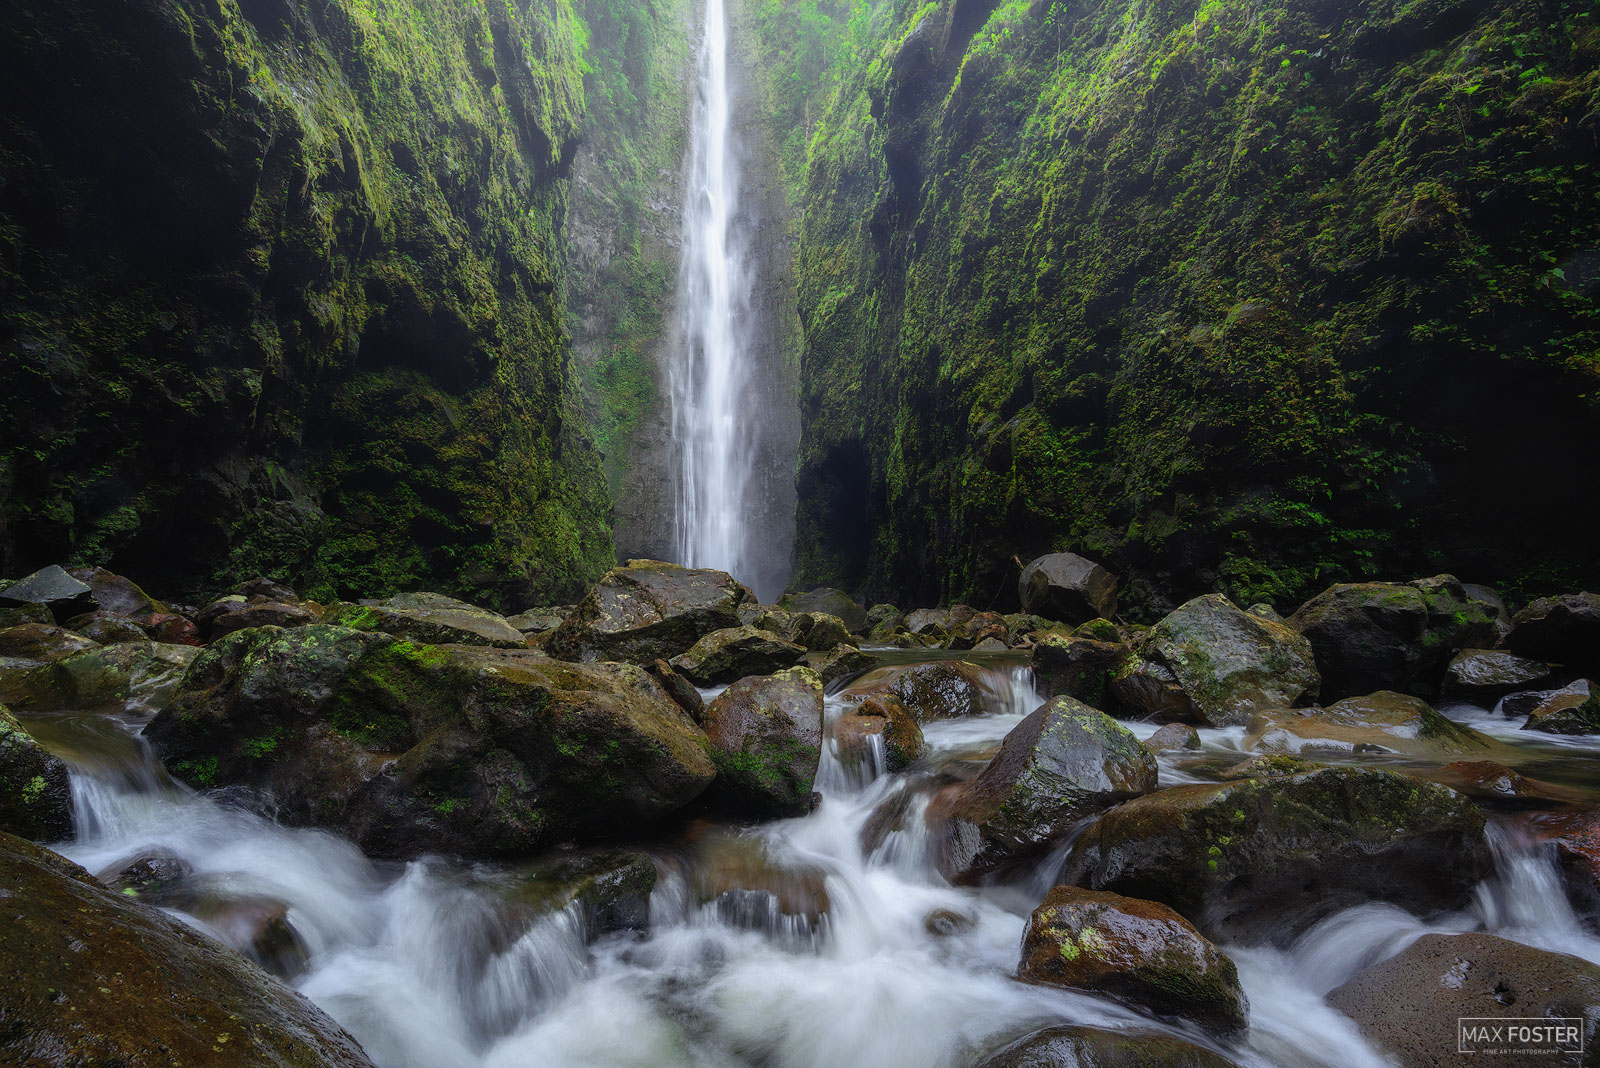 Elevate your space with Jungle Spirit, Max Foster's limited edition photography print of Secret Falls, Maui from his Hawaii gallery...